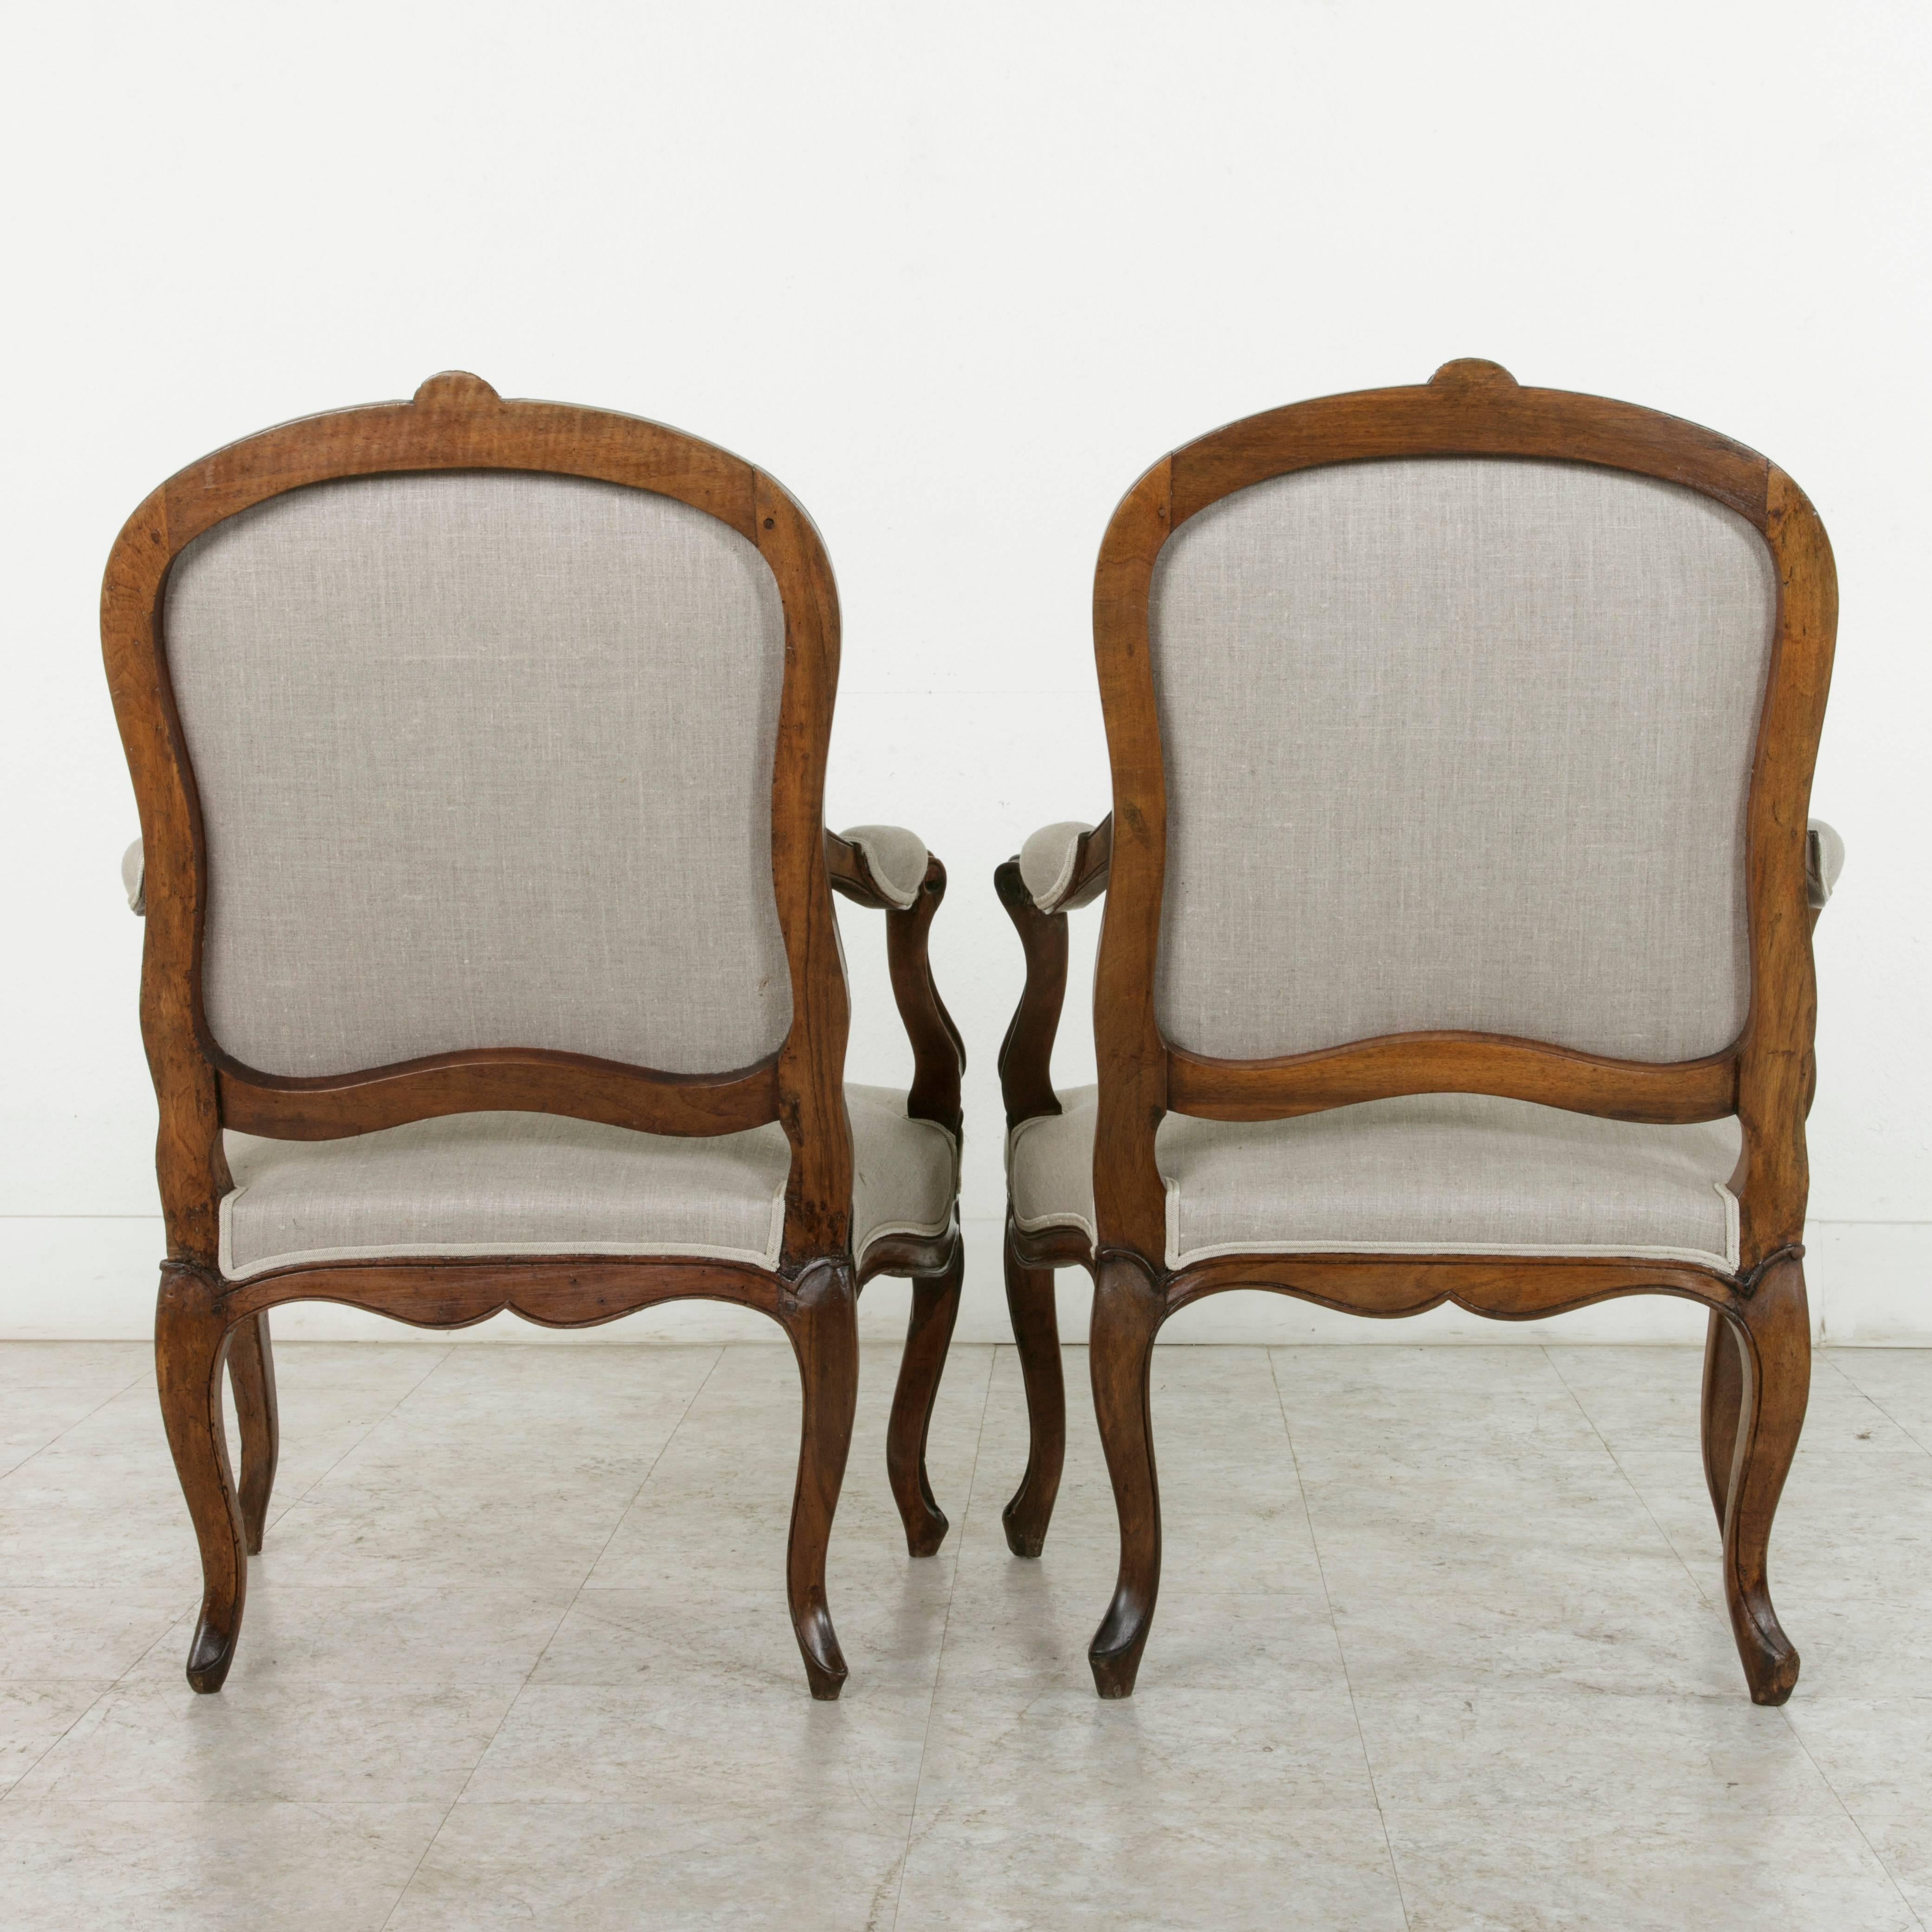 Upholstery Pair of 19th Century Hand Carved Walnut French Louis XV Style Armchairs in Linen